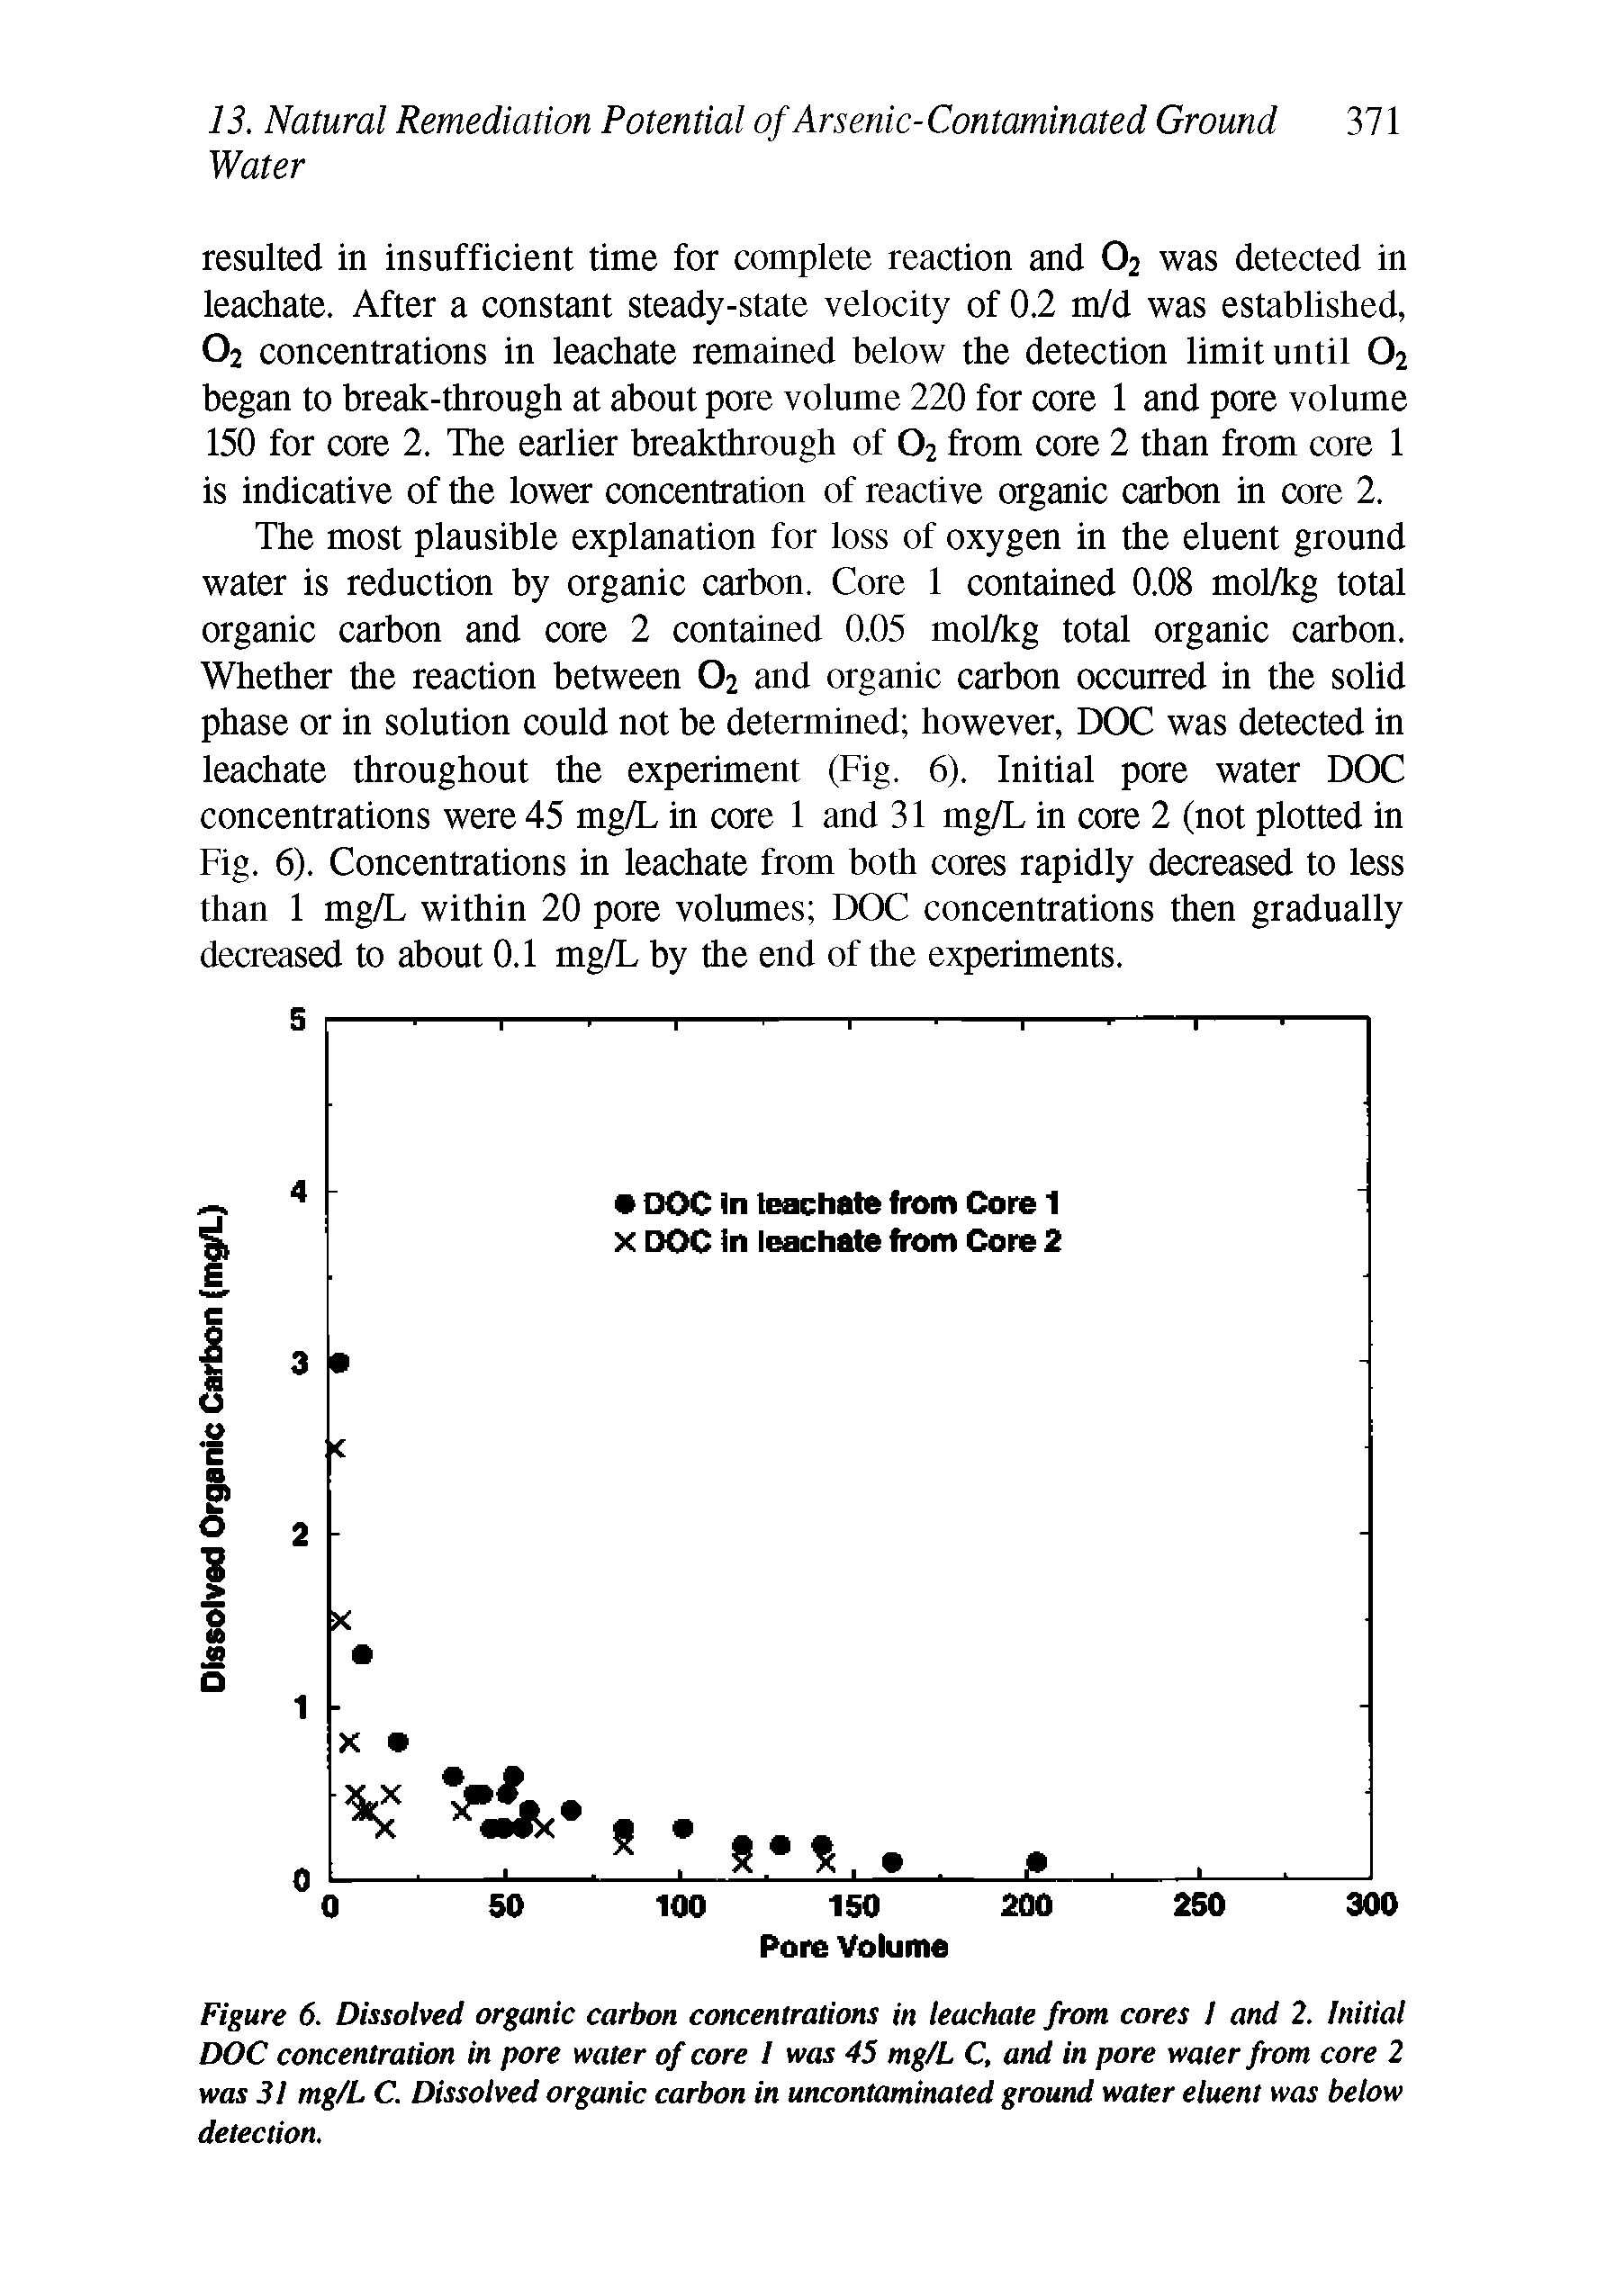 Figure 6. Dissolved organic carbon concentrations in leachate from cores I and 2. Initial DOC concentration in pore water of core I was 45 mg/L C, and in pore water from core 2 was 31 mg/L C. Dissolved organic carbon in uncontaminated ground water eluent was below detection.